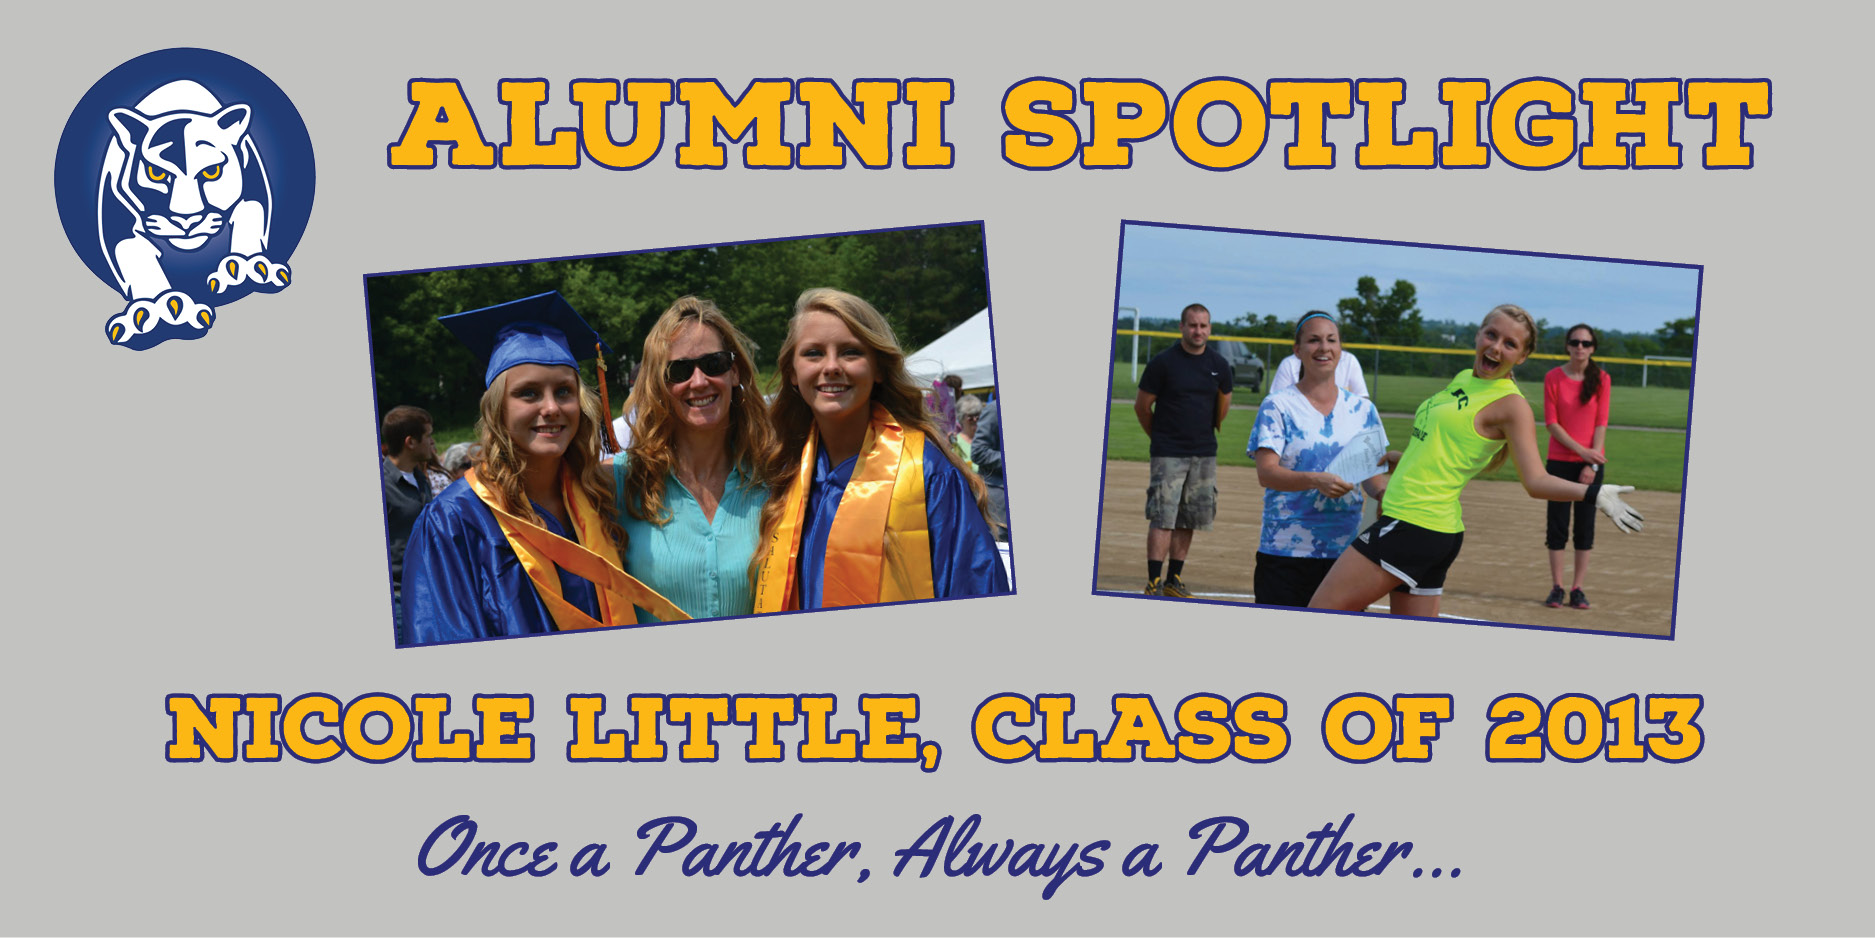 Photo of Nicole Little with family at graduation and accepting an athletic award. Words saying Alumni Spotlight, Nicole Little, Class of 2013 and Once a Panther, Always a Panther.